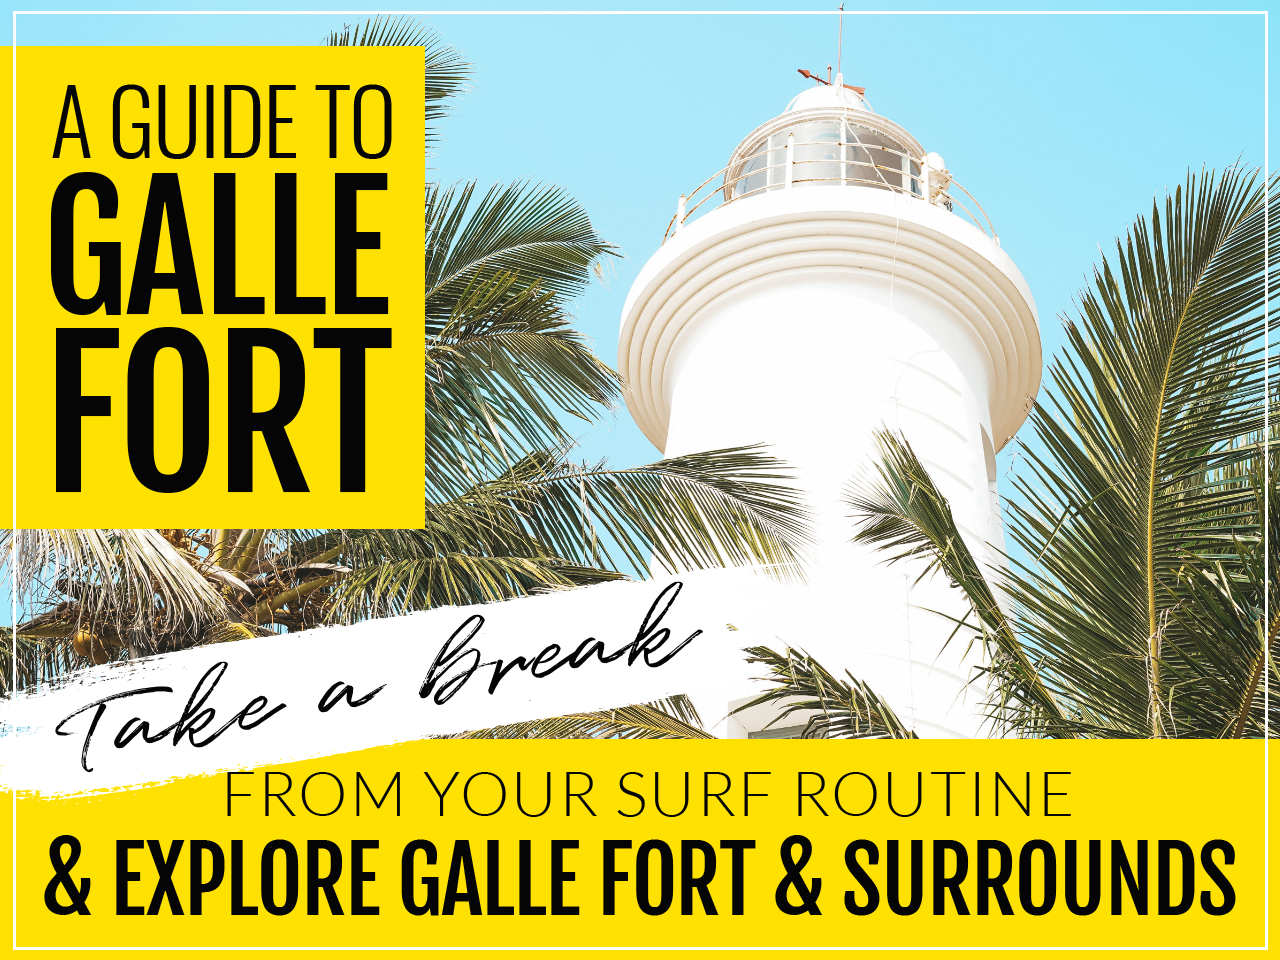 A GUIDE TO GALLE FORT - Things To Do Around Ahangama